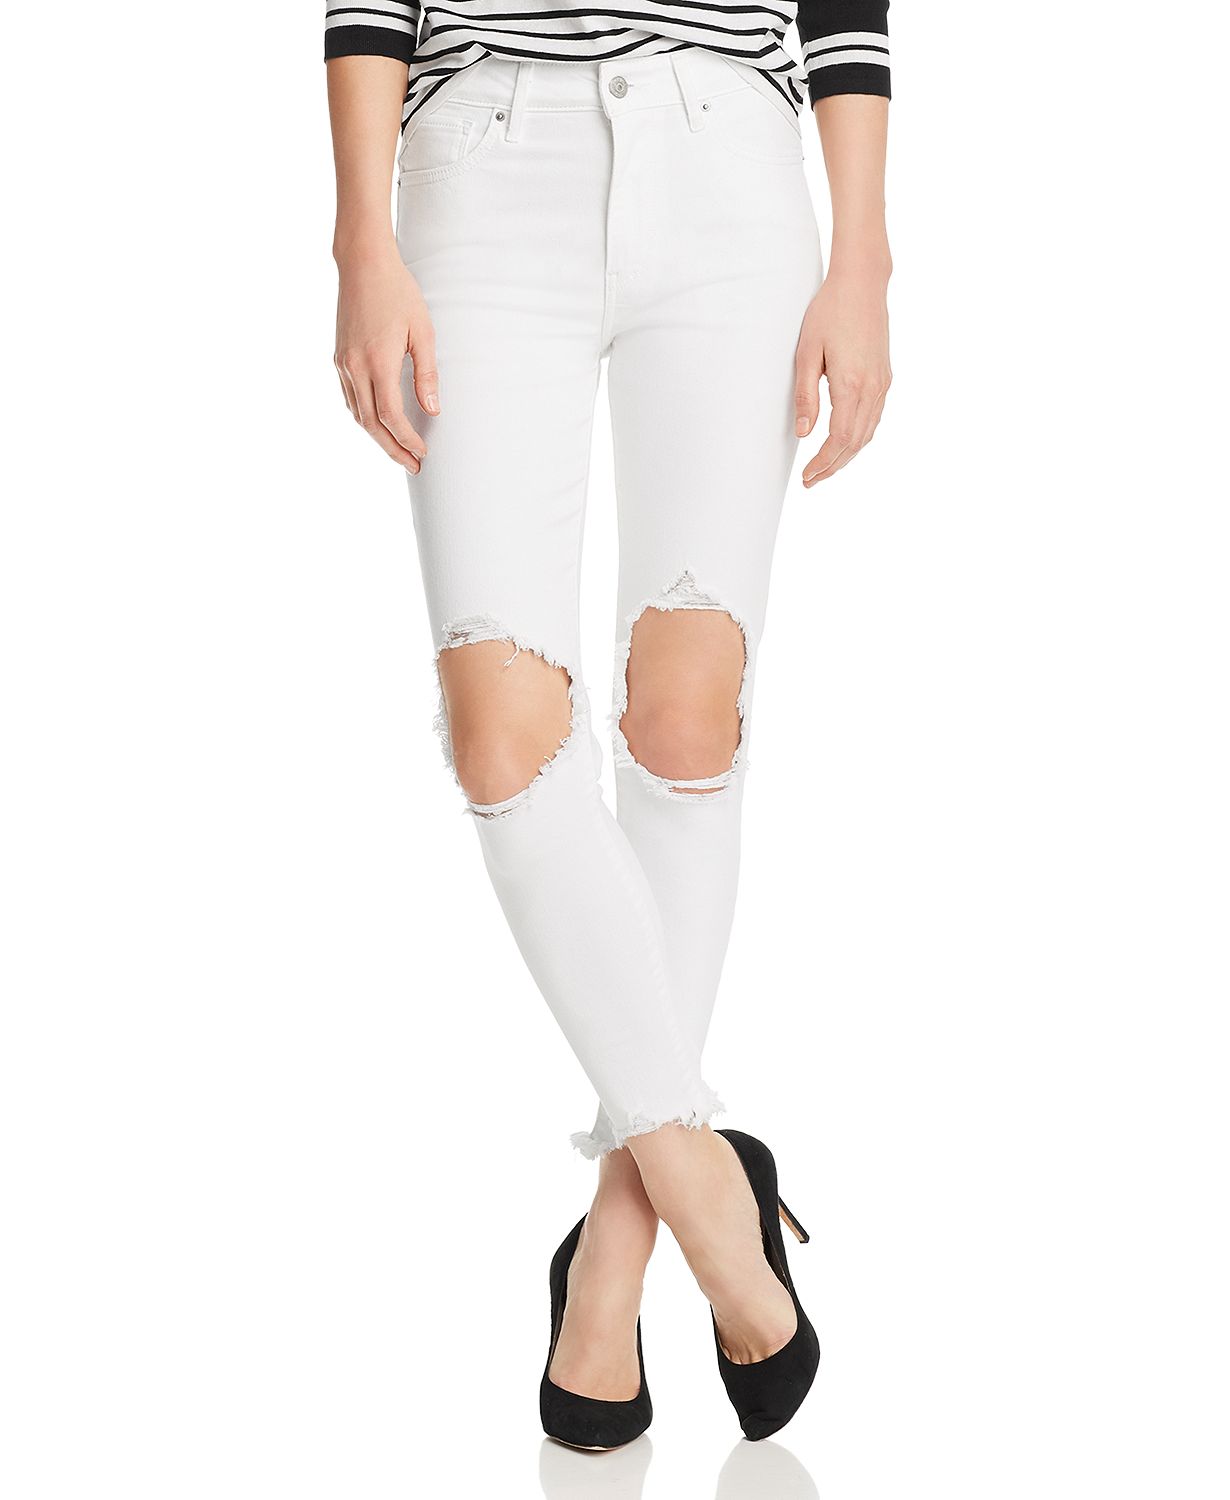 woocommerce-673321-2209615.cloudwaysapps.com-levis-womens-white-721-high-rise-skinny-jeans